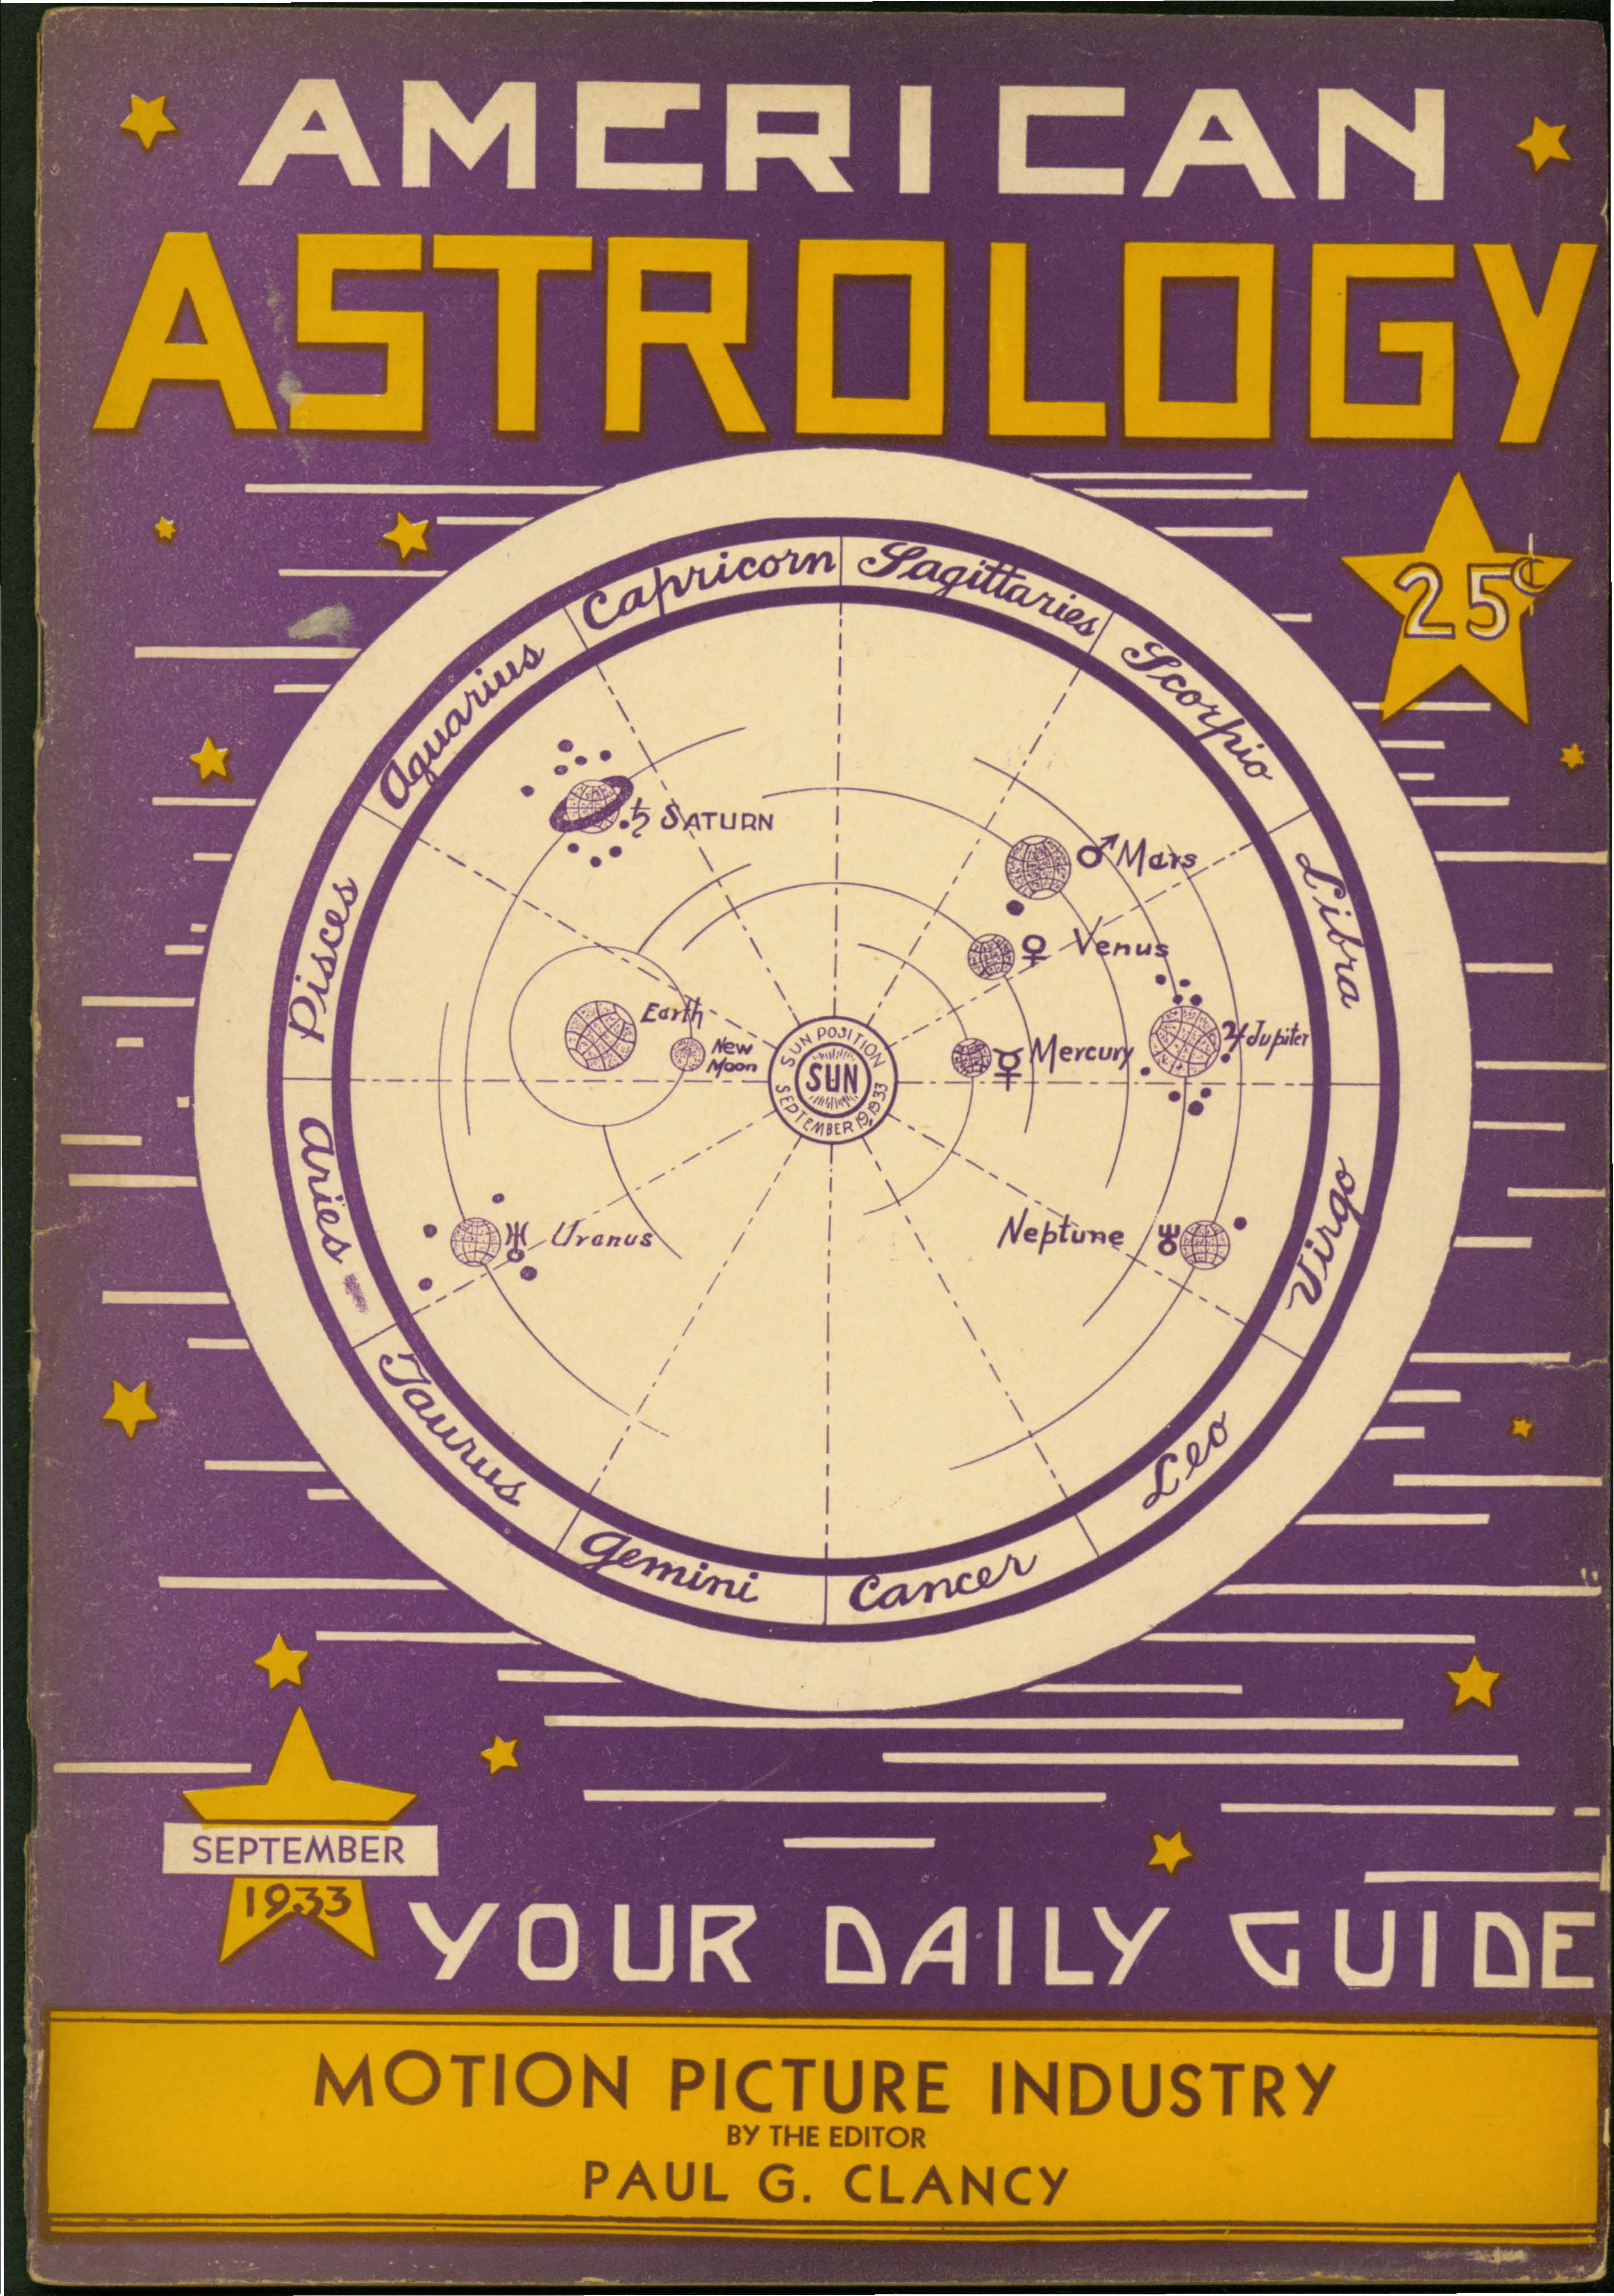 American Astrology 1933 covers_Page_5